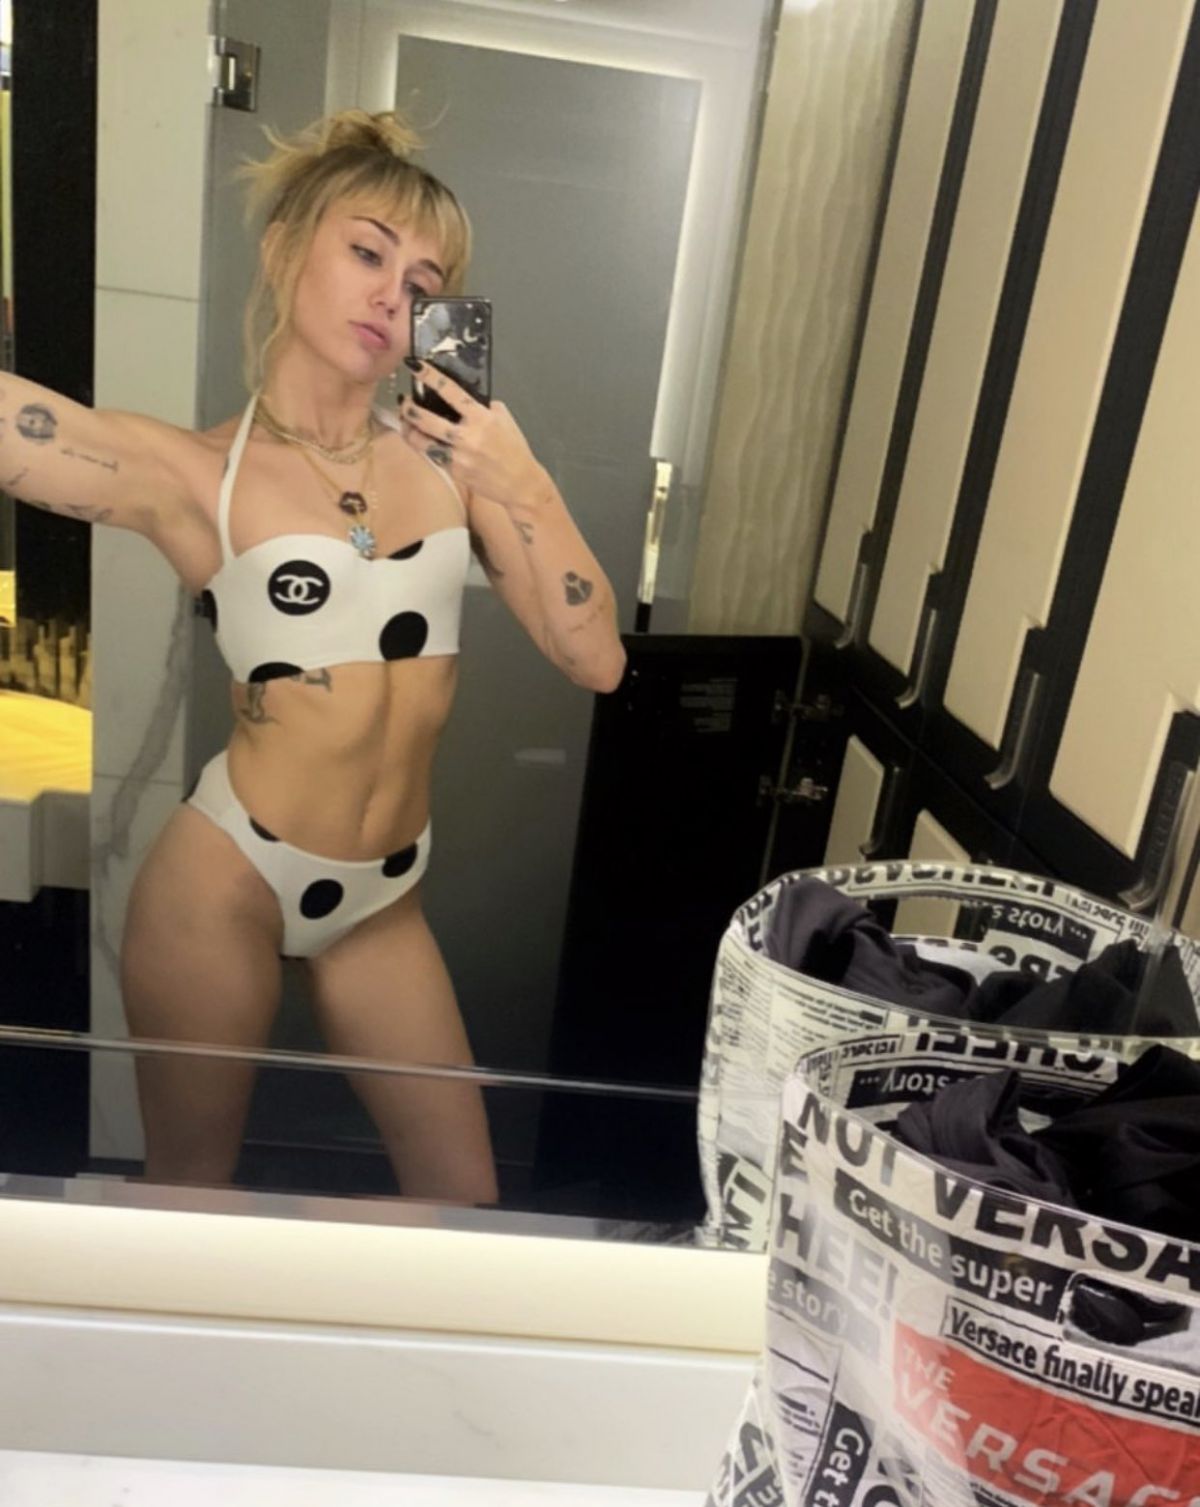 Best Miley Cyrus Images On Pinterest Miley Cyrus Bikini Photos And Bikini Pictures